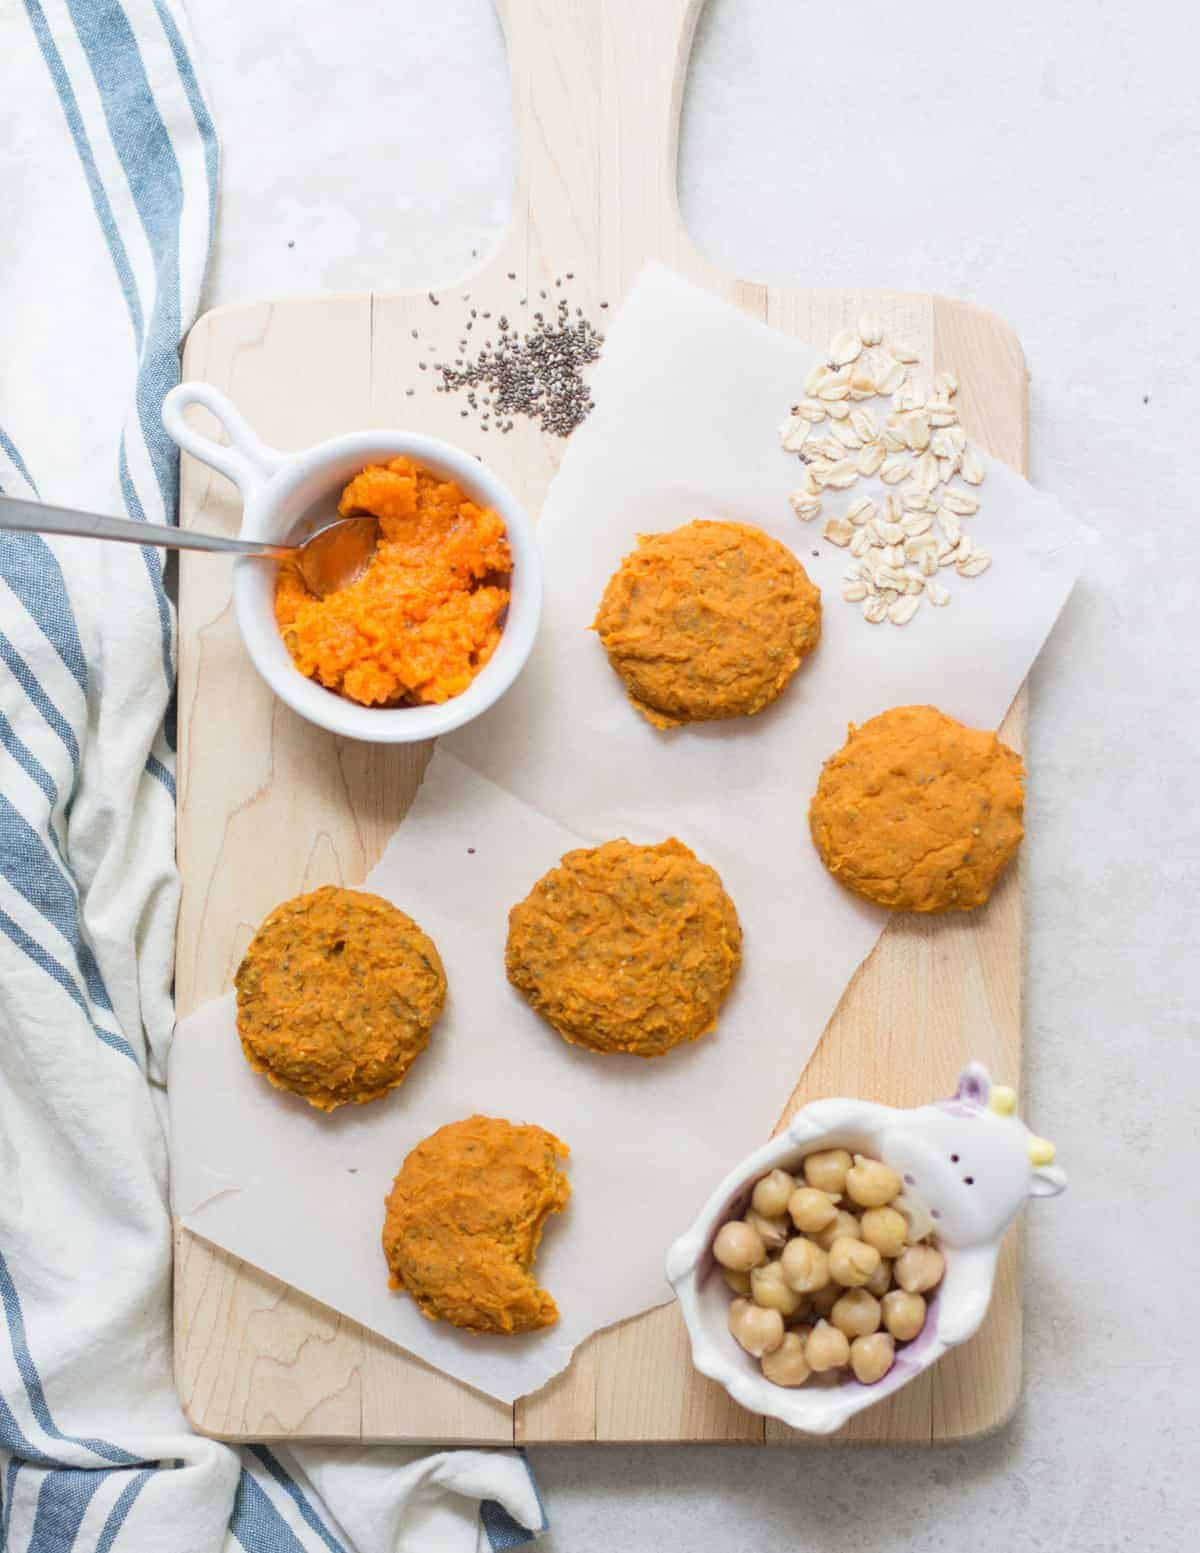 five baked cookies on a wooden board with mashed sweet potatoes, chickpeas, oats, and chia seeds